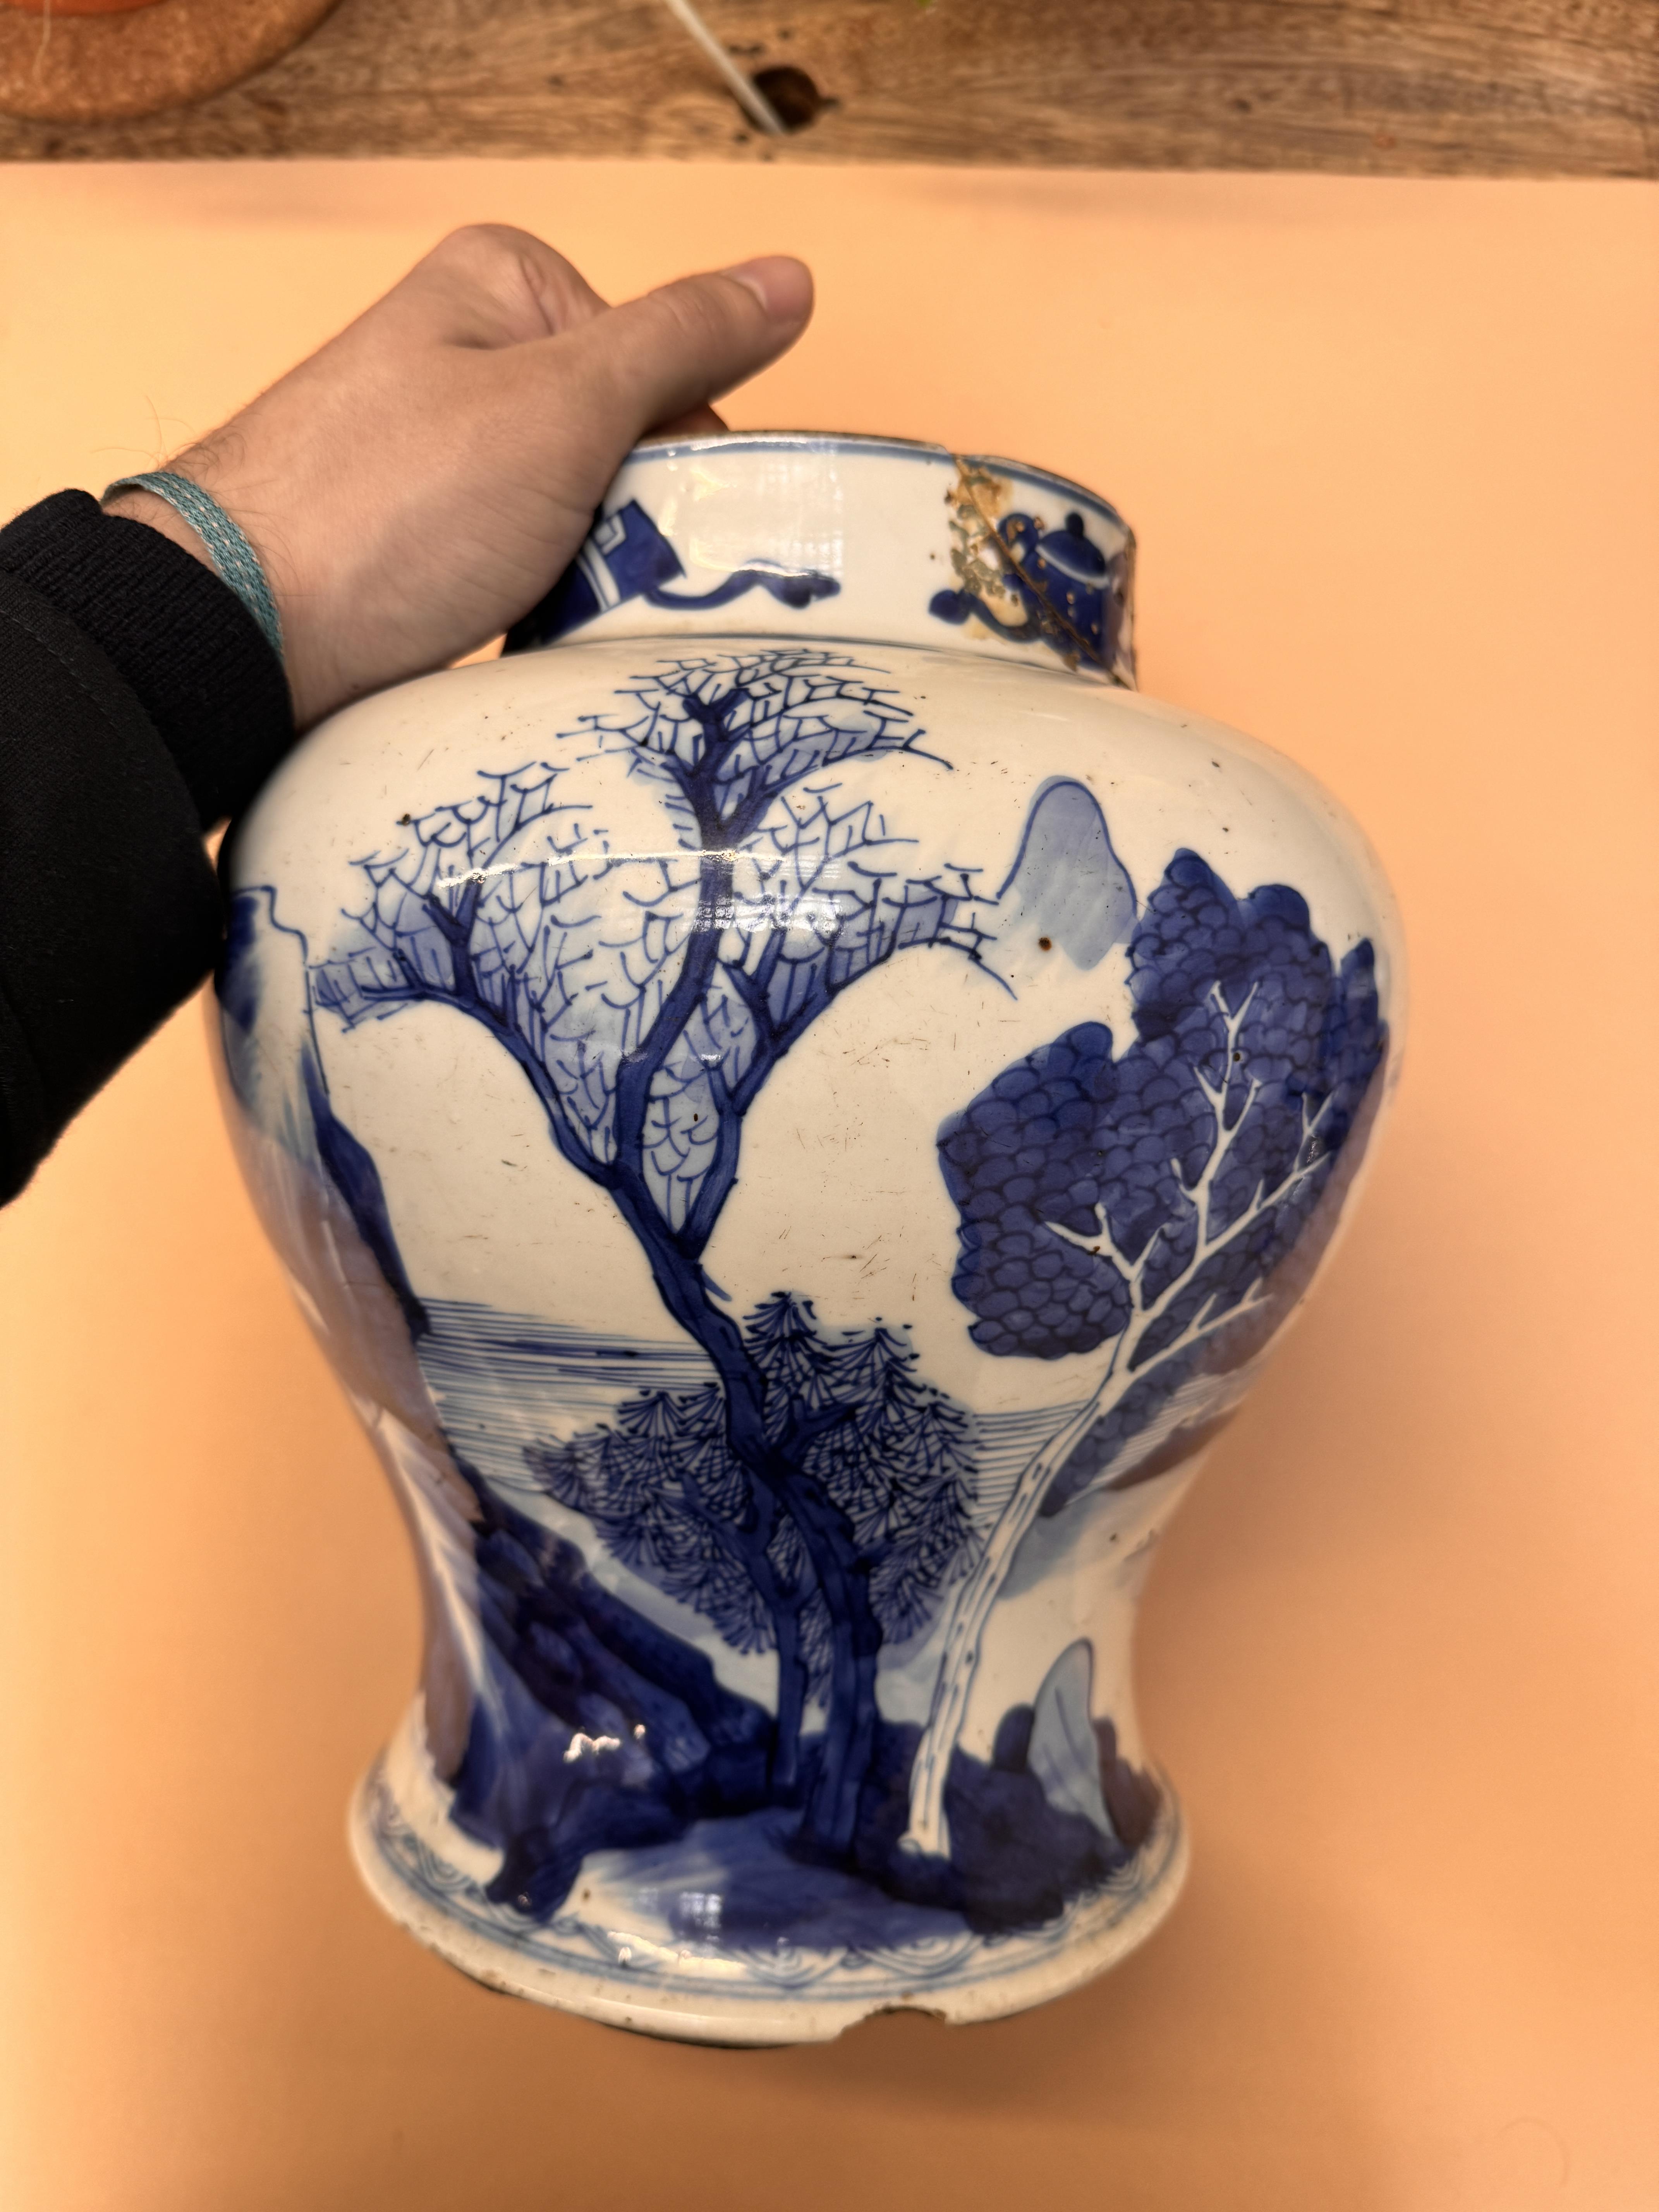 A CHINESE BLUE AND WHITE 'LANDSCAPE' VASE 清康熙 青花山水圖紋瓶 - Image 9 of 22